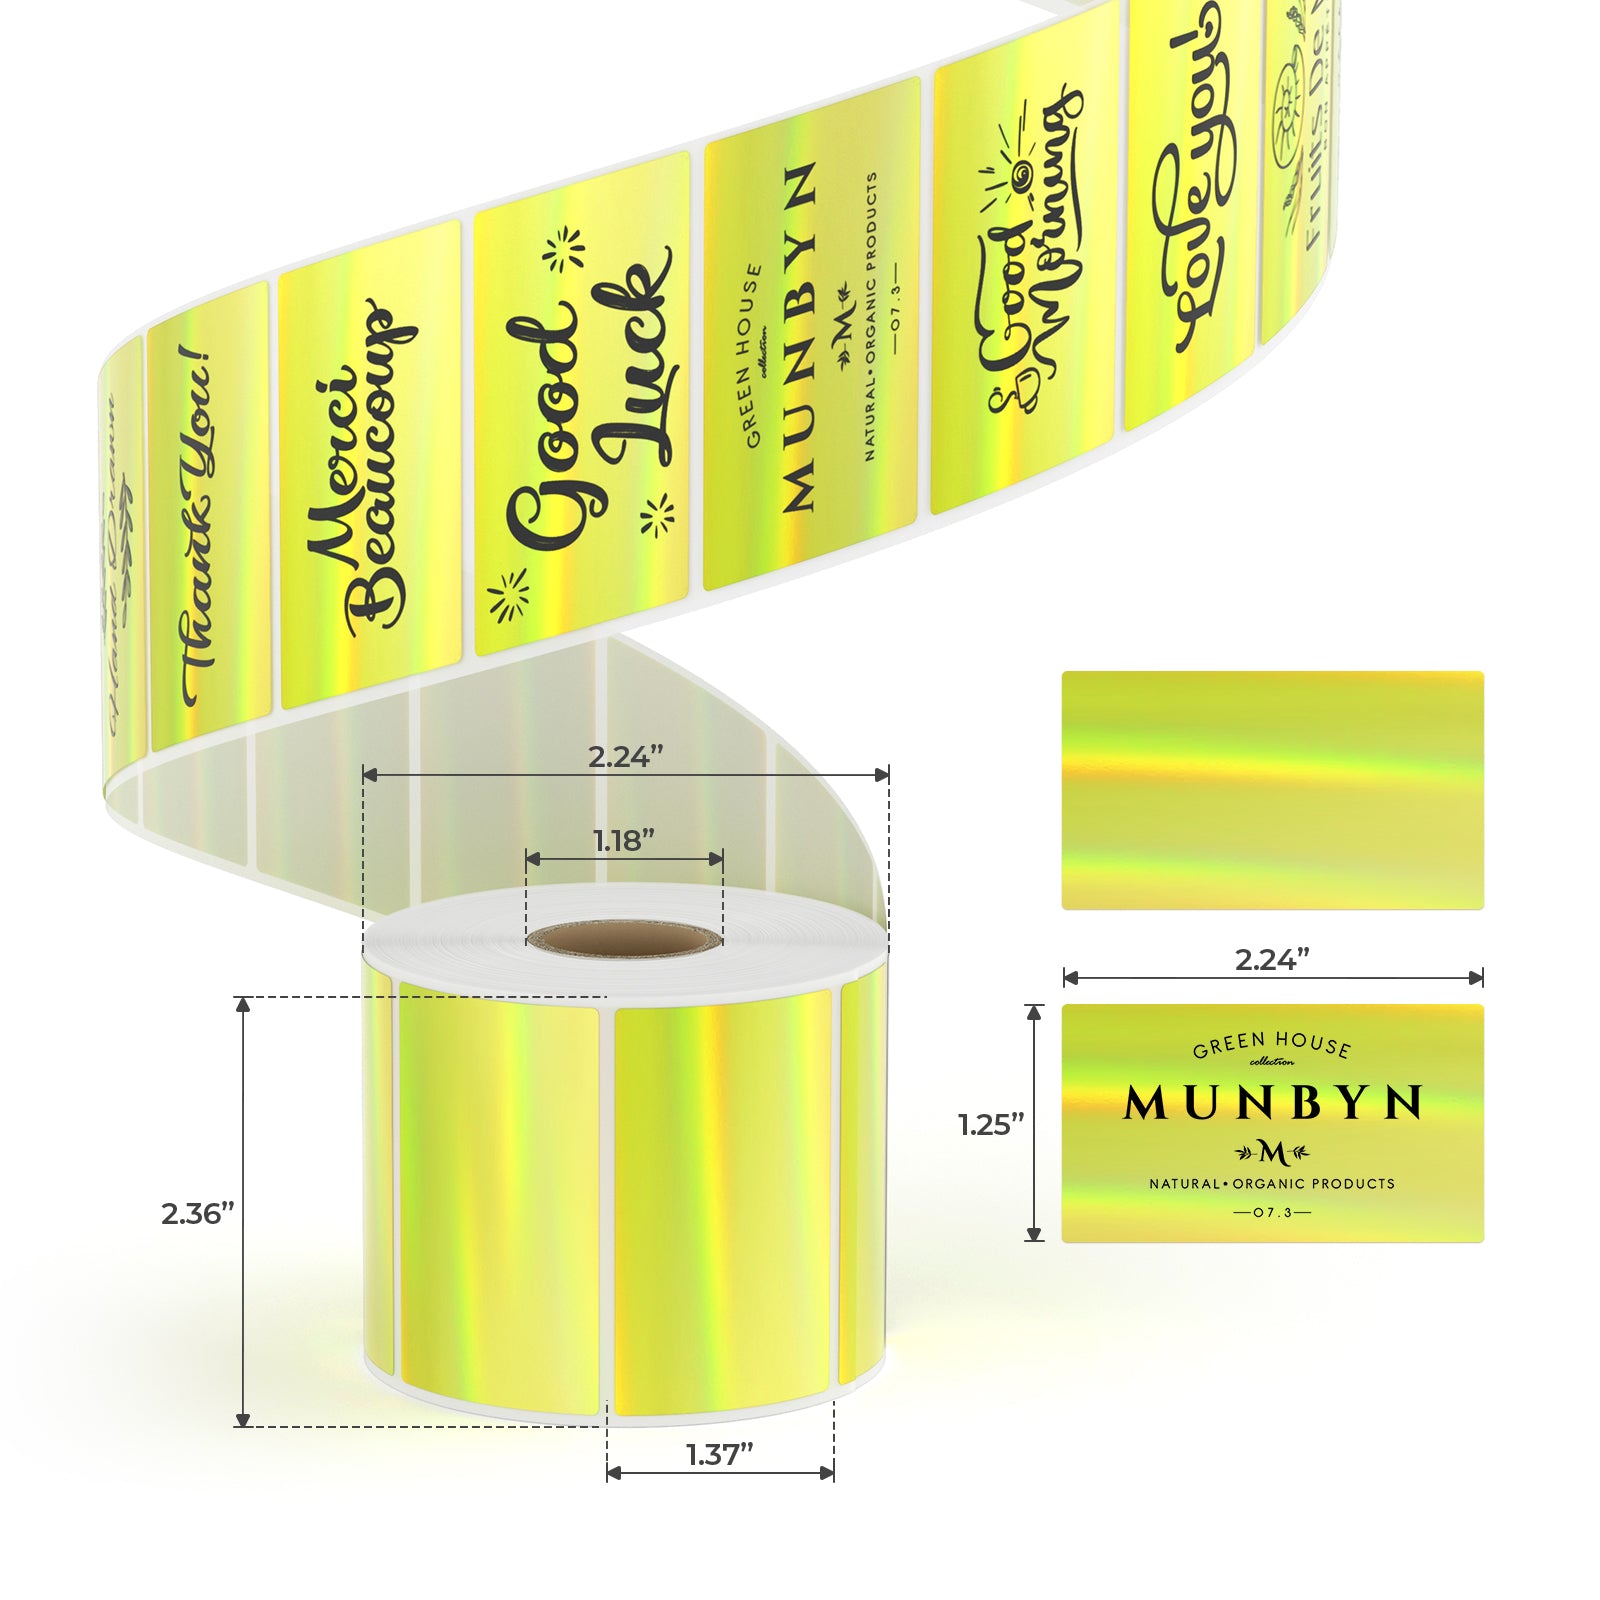 MUNBYN's versatile gold holographic rectangle thermal labels measure 1.25